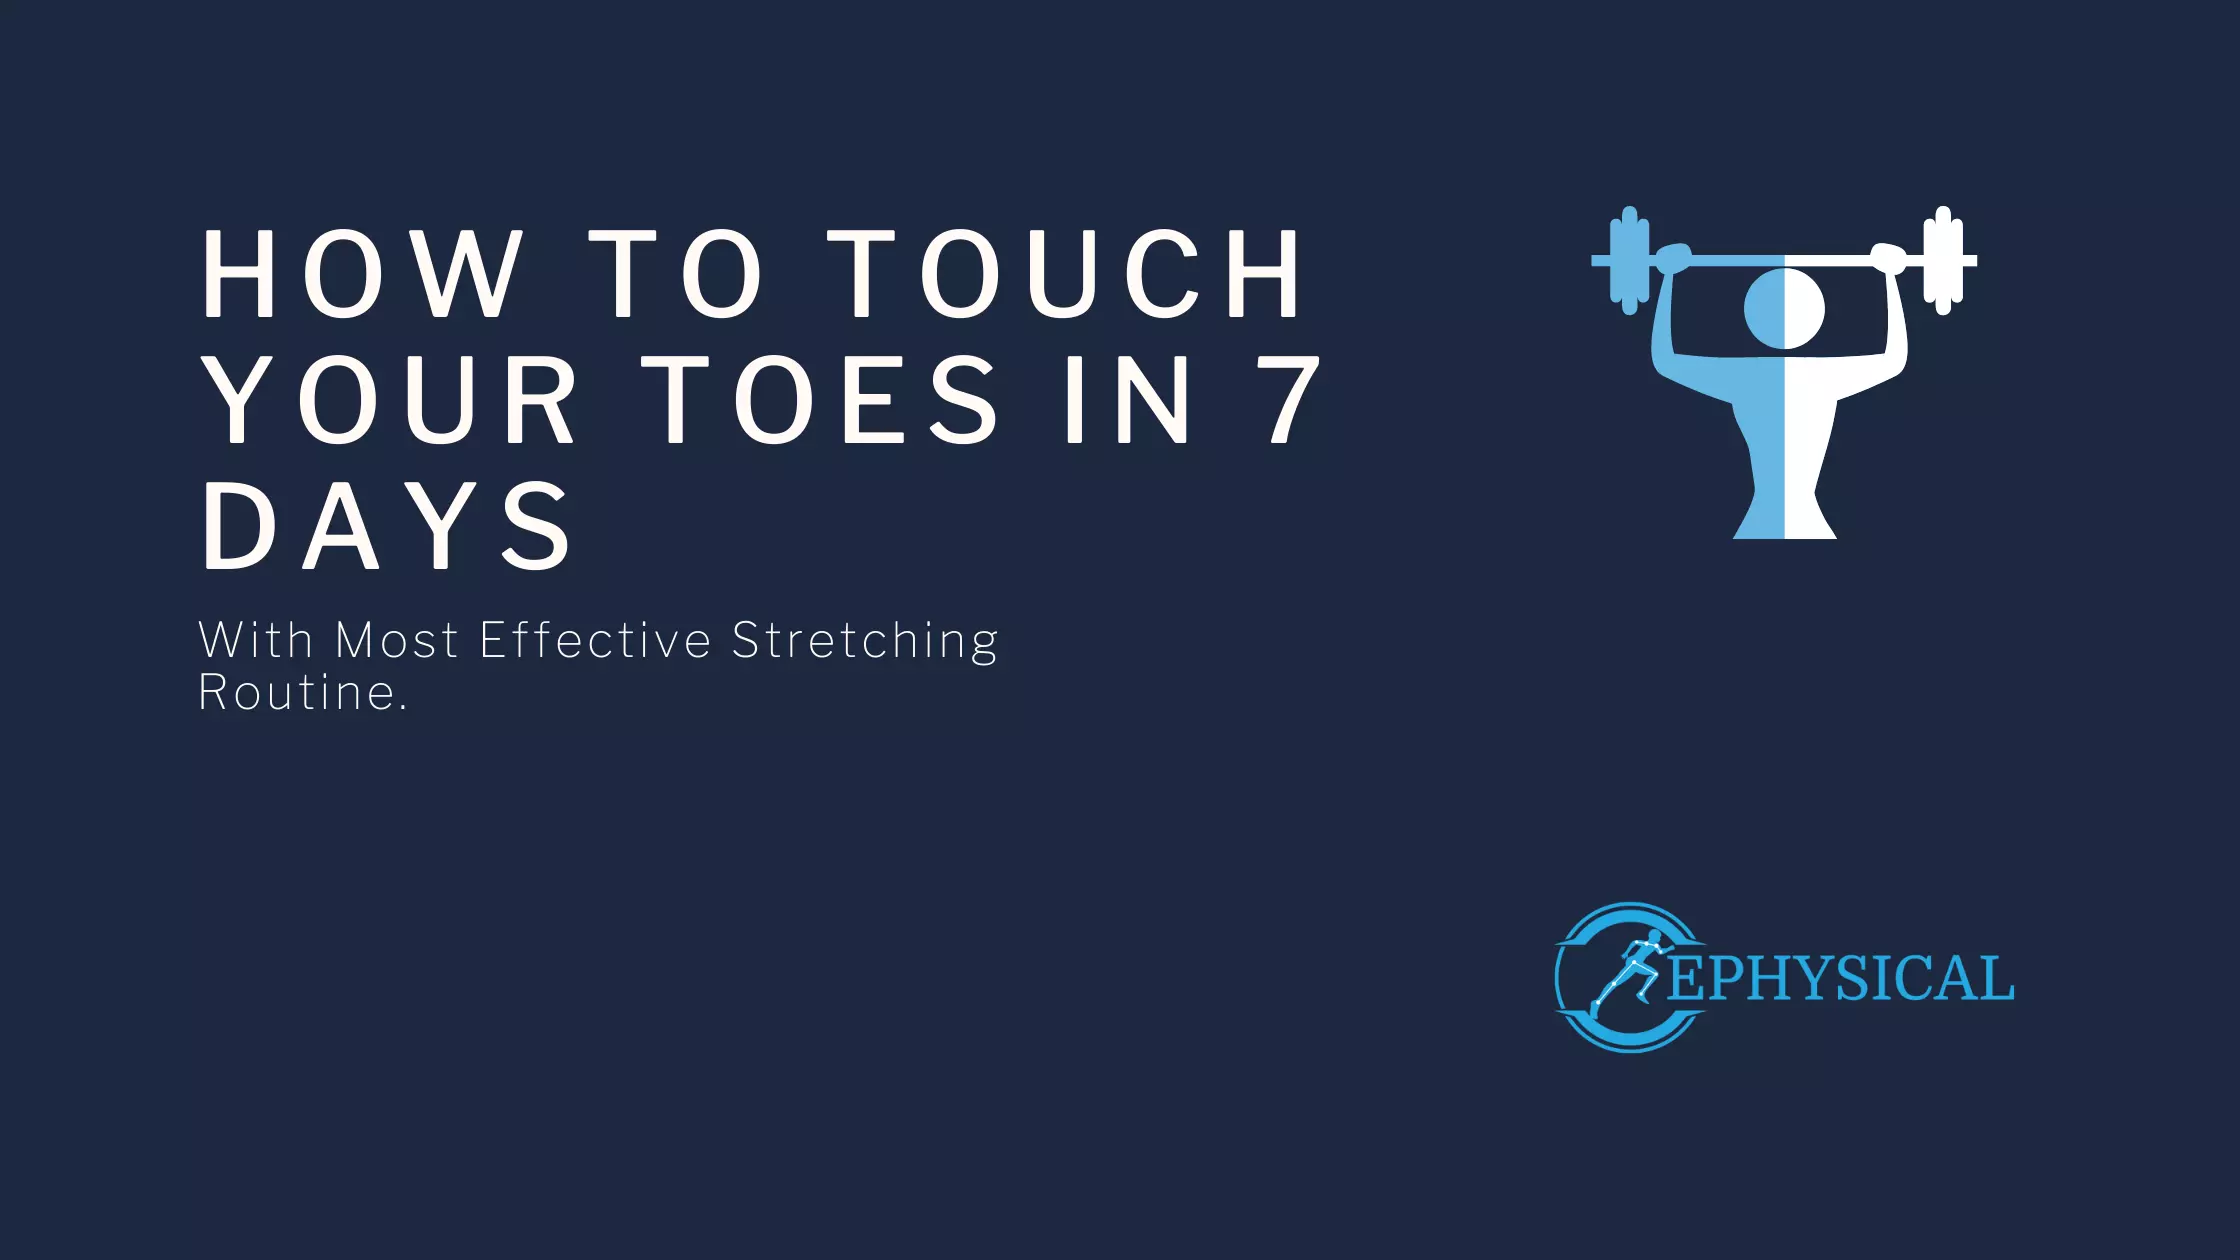 how to touch your toes ephysical